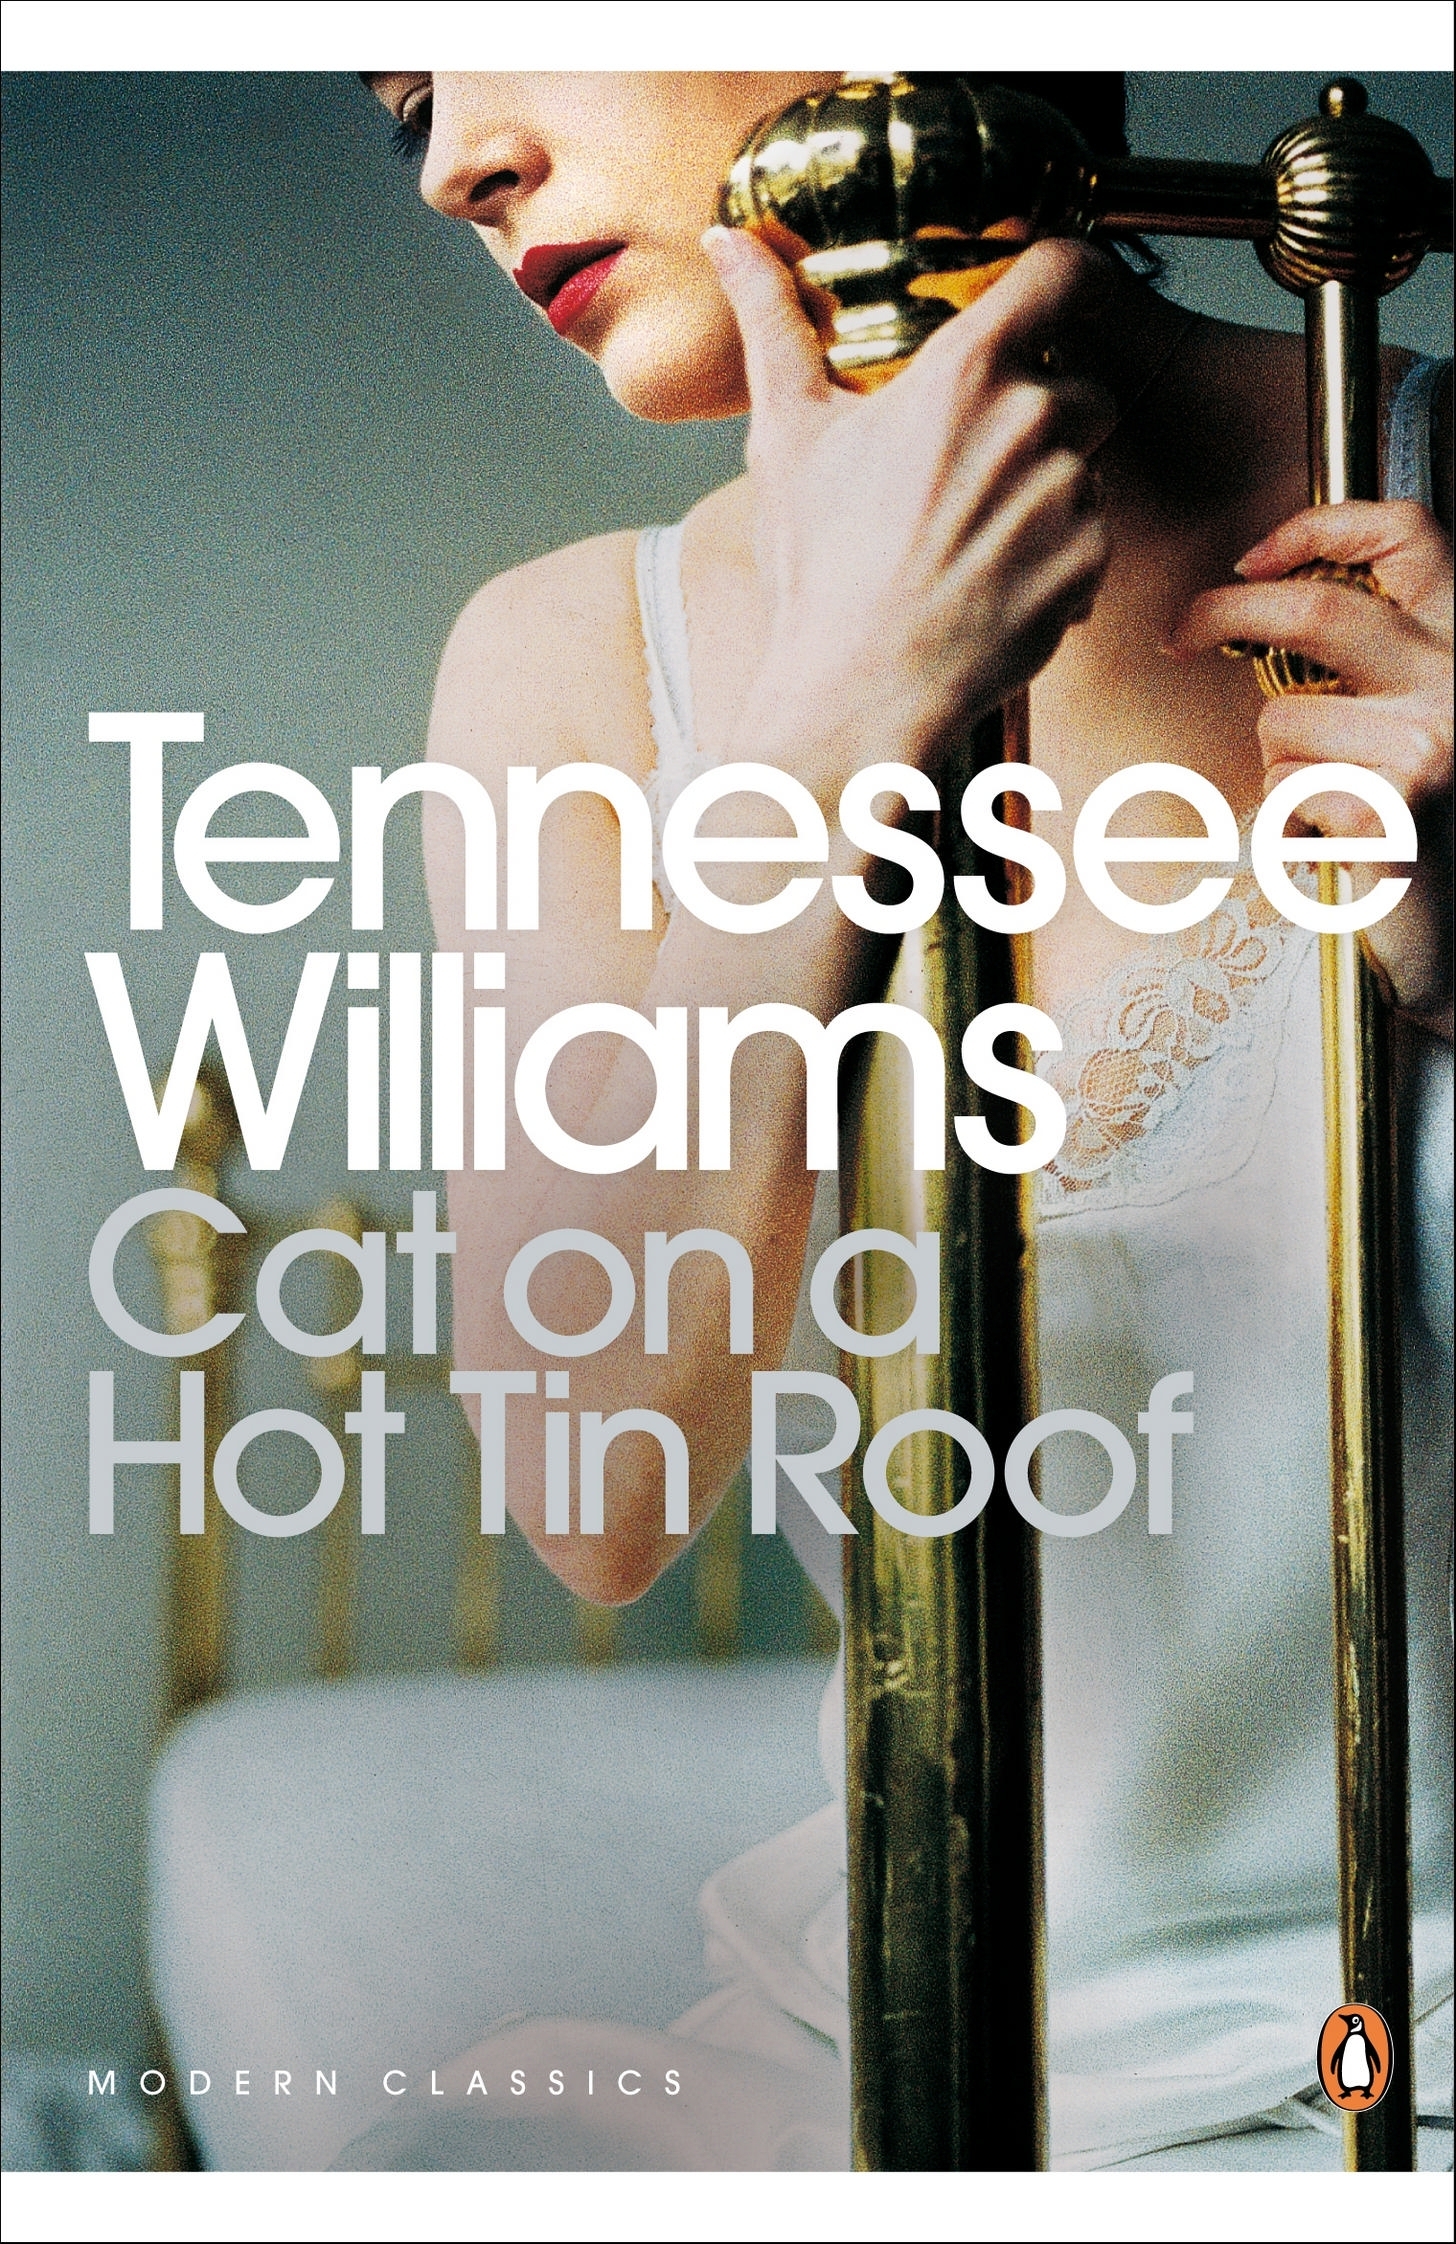 Cat on a Hot Tin Roof by Tennessee Williams Penguin Books Australia